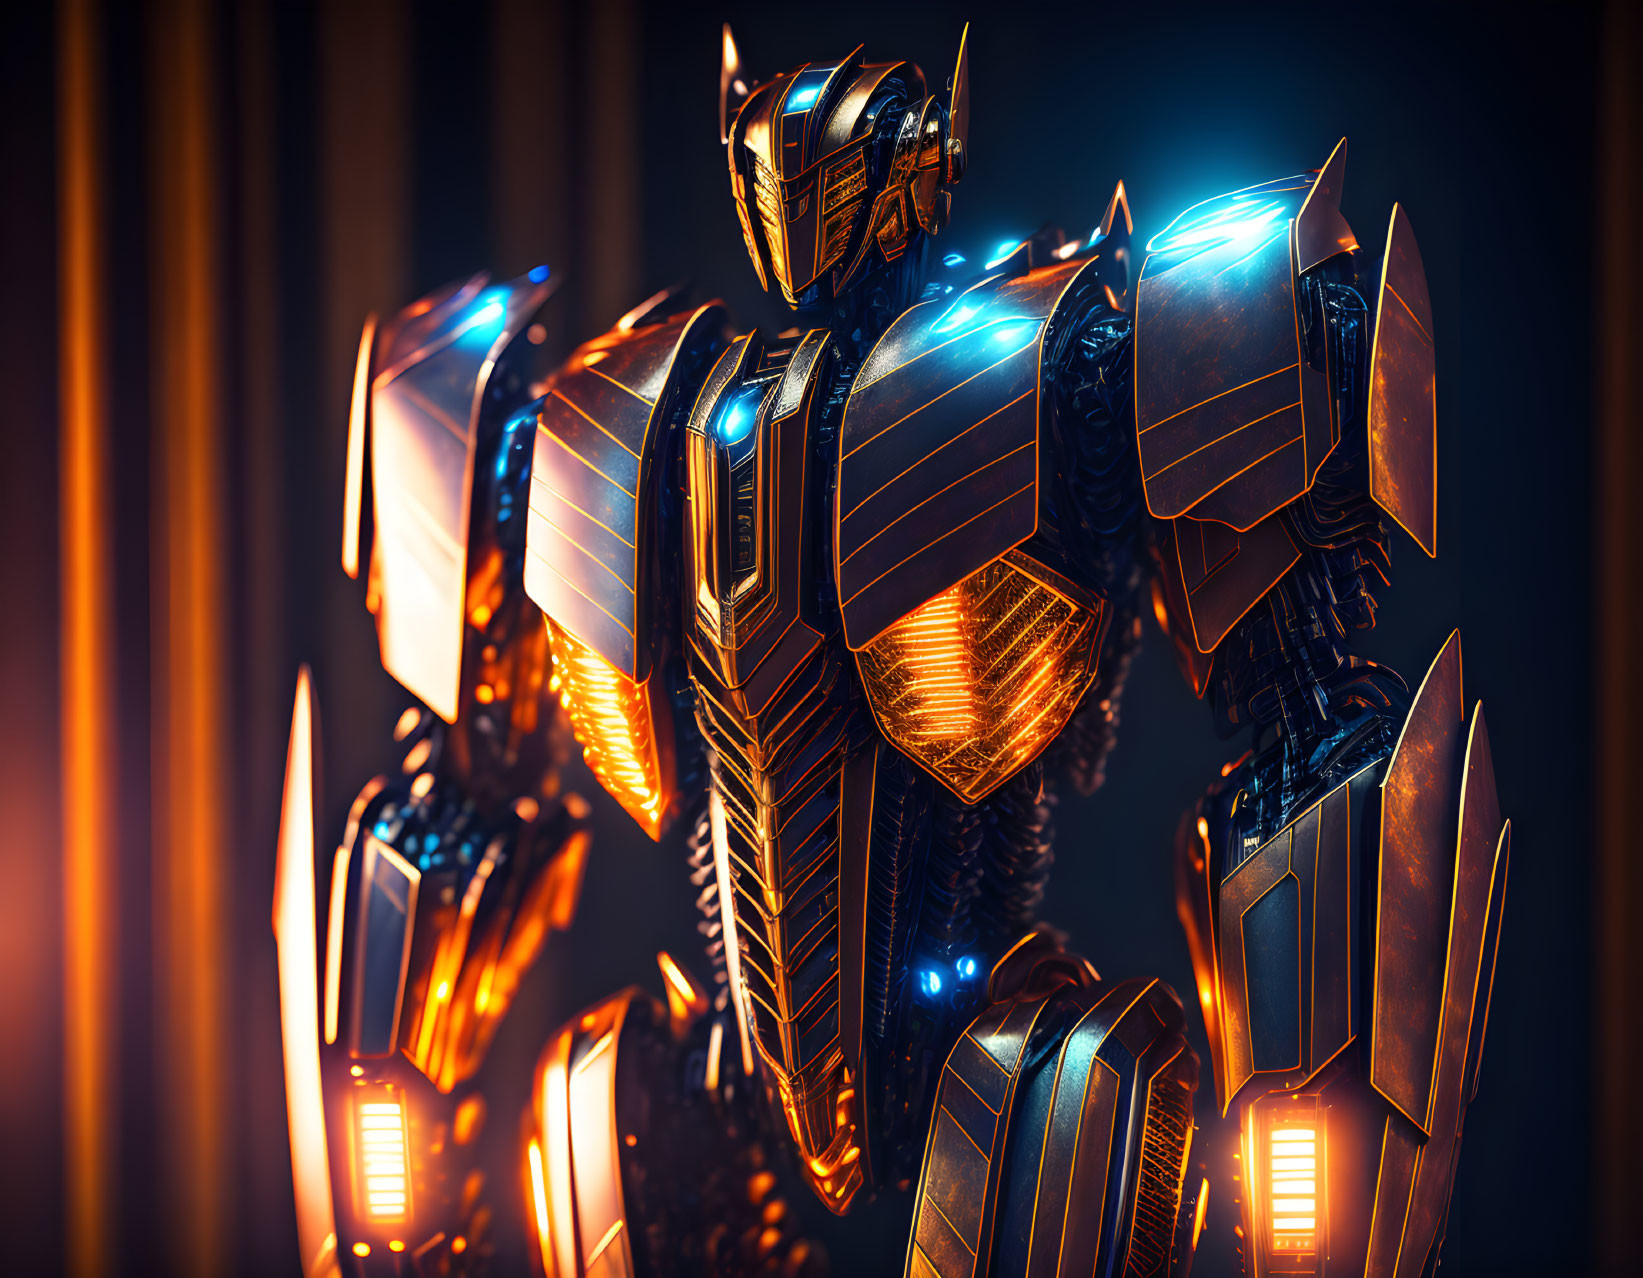 Detailed Robot with Glowing Orange and Blue Lights Against Vertical Illuminated Panels